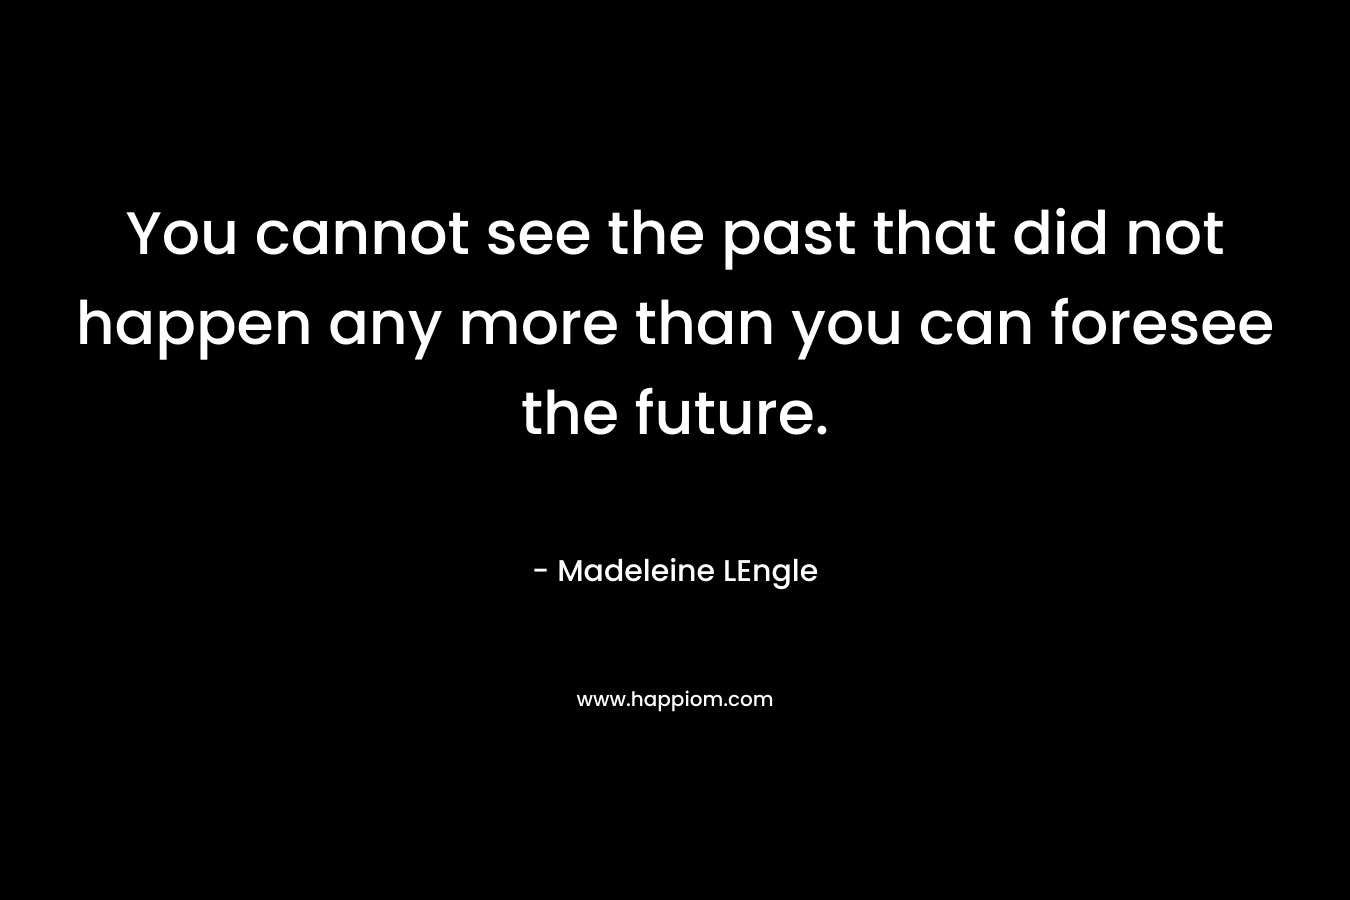 You cannot see the past that did not happen any more than you can foresee the future.